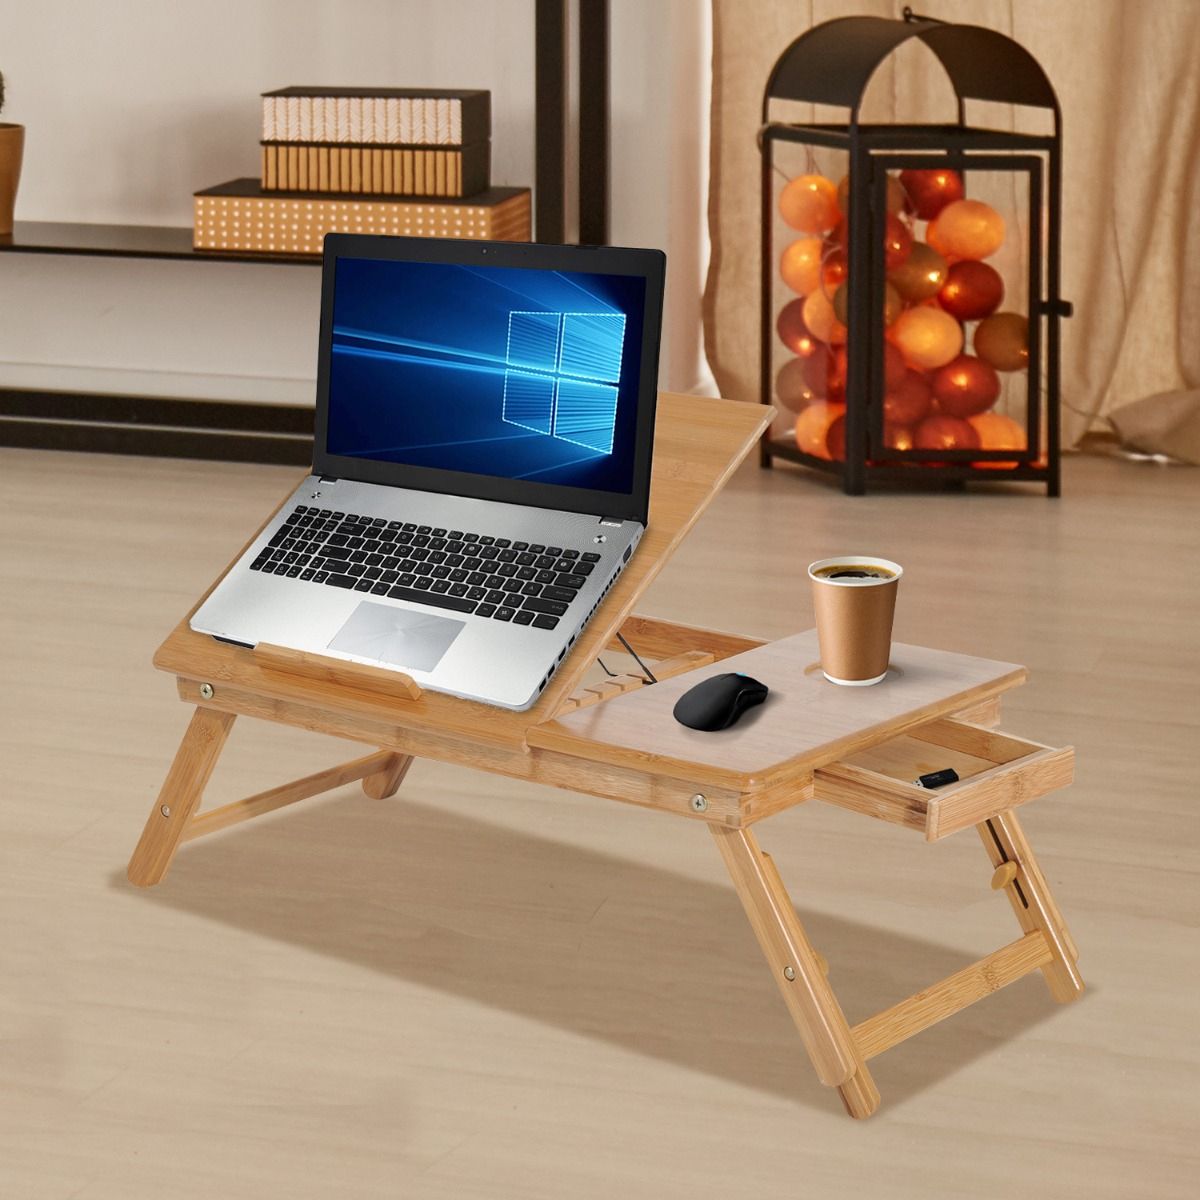 Homcom Portable Desk Foldable Bamboo Wood Laptop Stand Notebook Desk With Regard To Cherry Adjustable Laptop Desks (View 9 of 15)